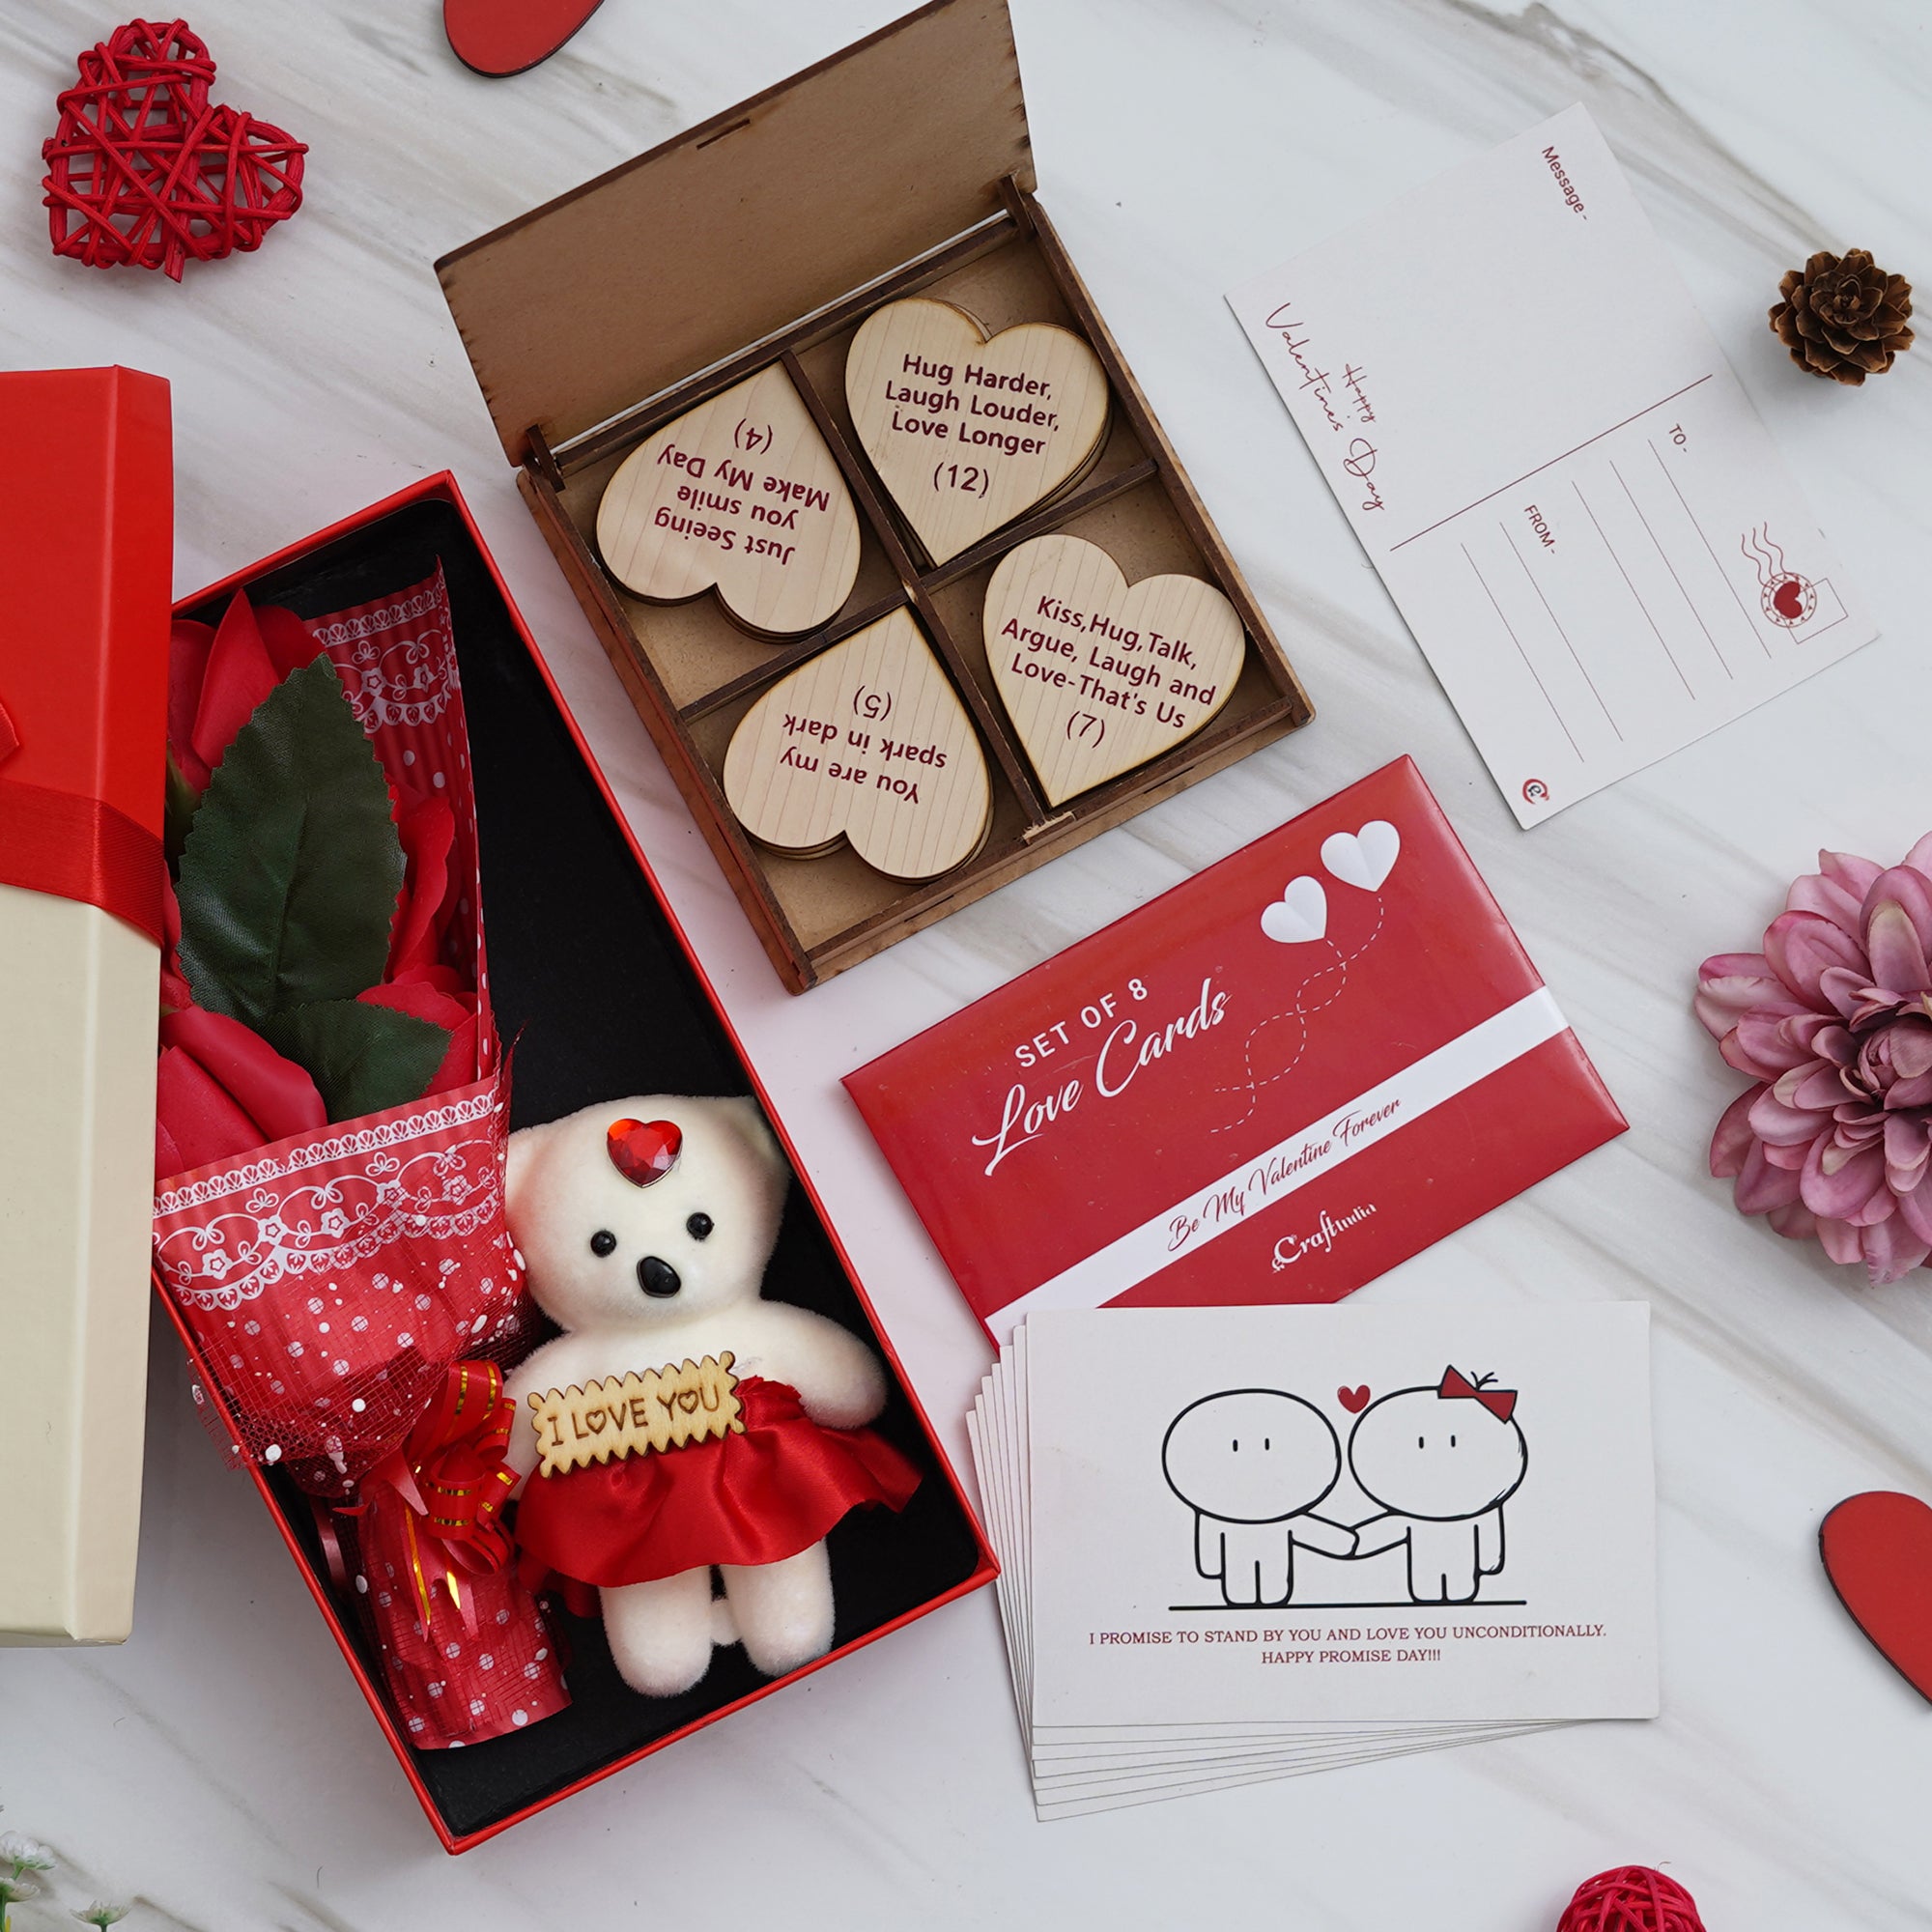 Valentine Combo of Set of 8 Love Post Cards Gift Cards Set, "20 Reasons Why I Love You" Printed on Little Hearts Wooden Gift Set, Red Roses Bouquet and White, Red Teddy Bear Valentine's Rectangle Shaped Gift Box